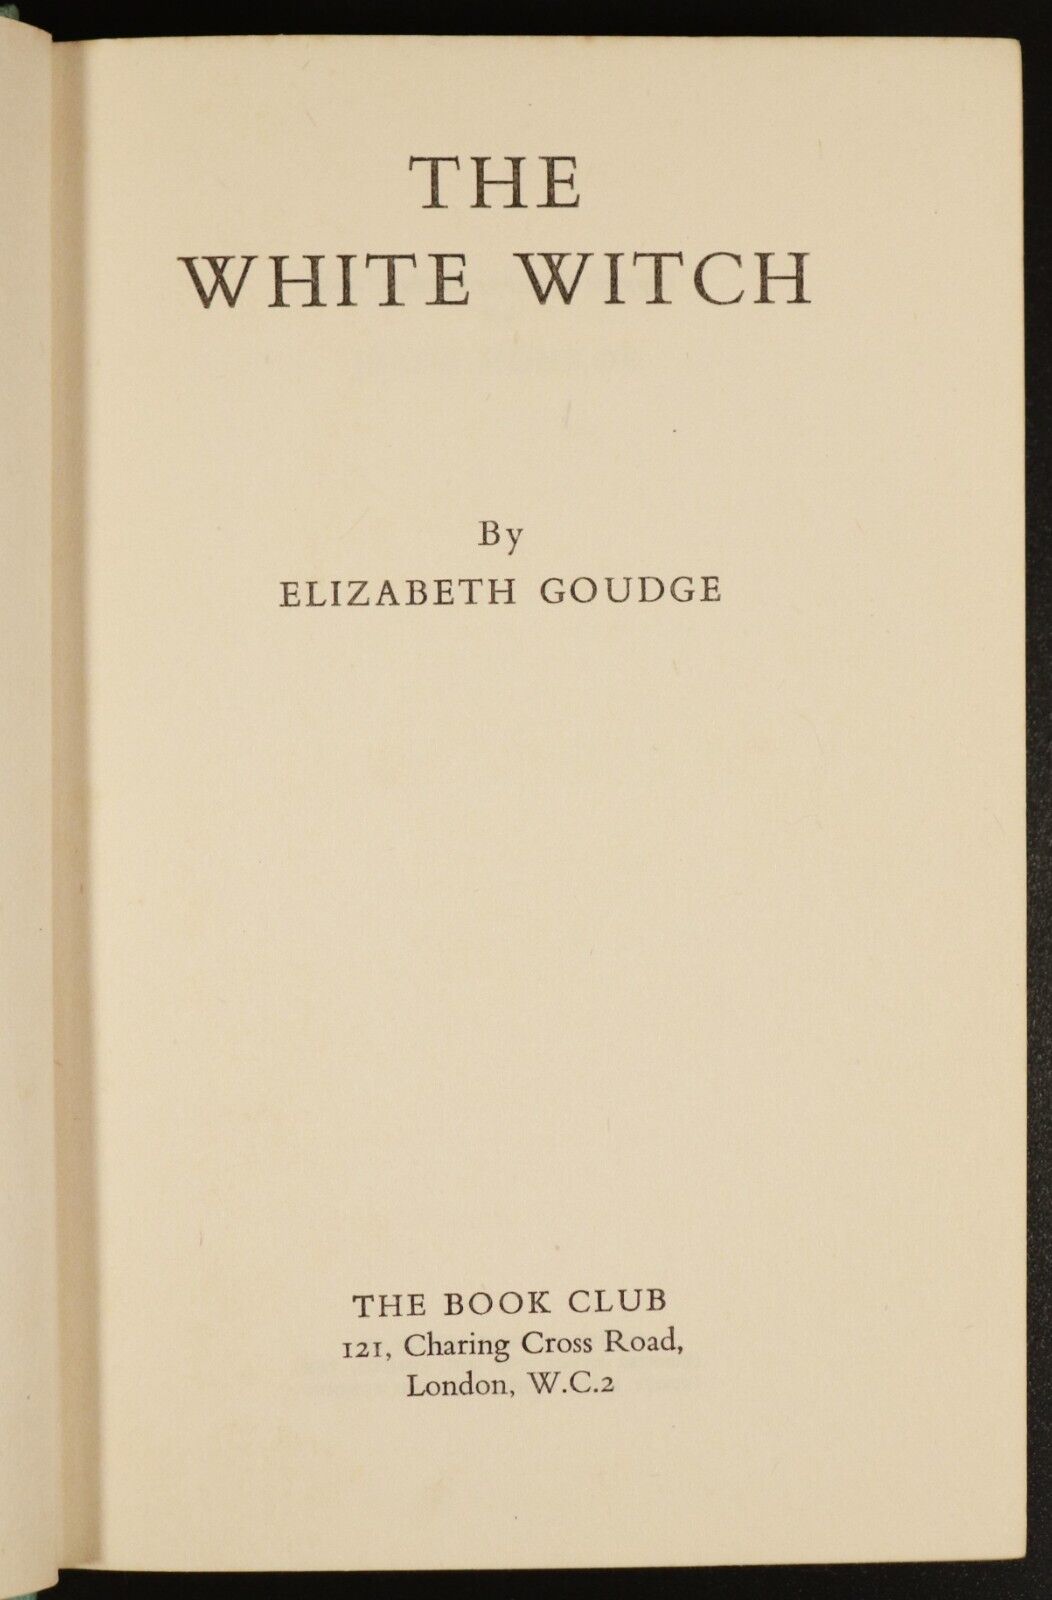 1958 The White Witch by Elizabeth Goudge British Fiction Book